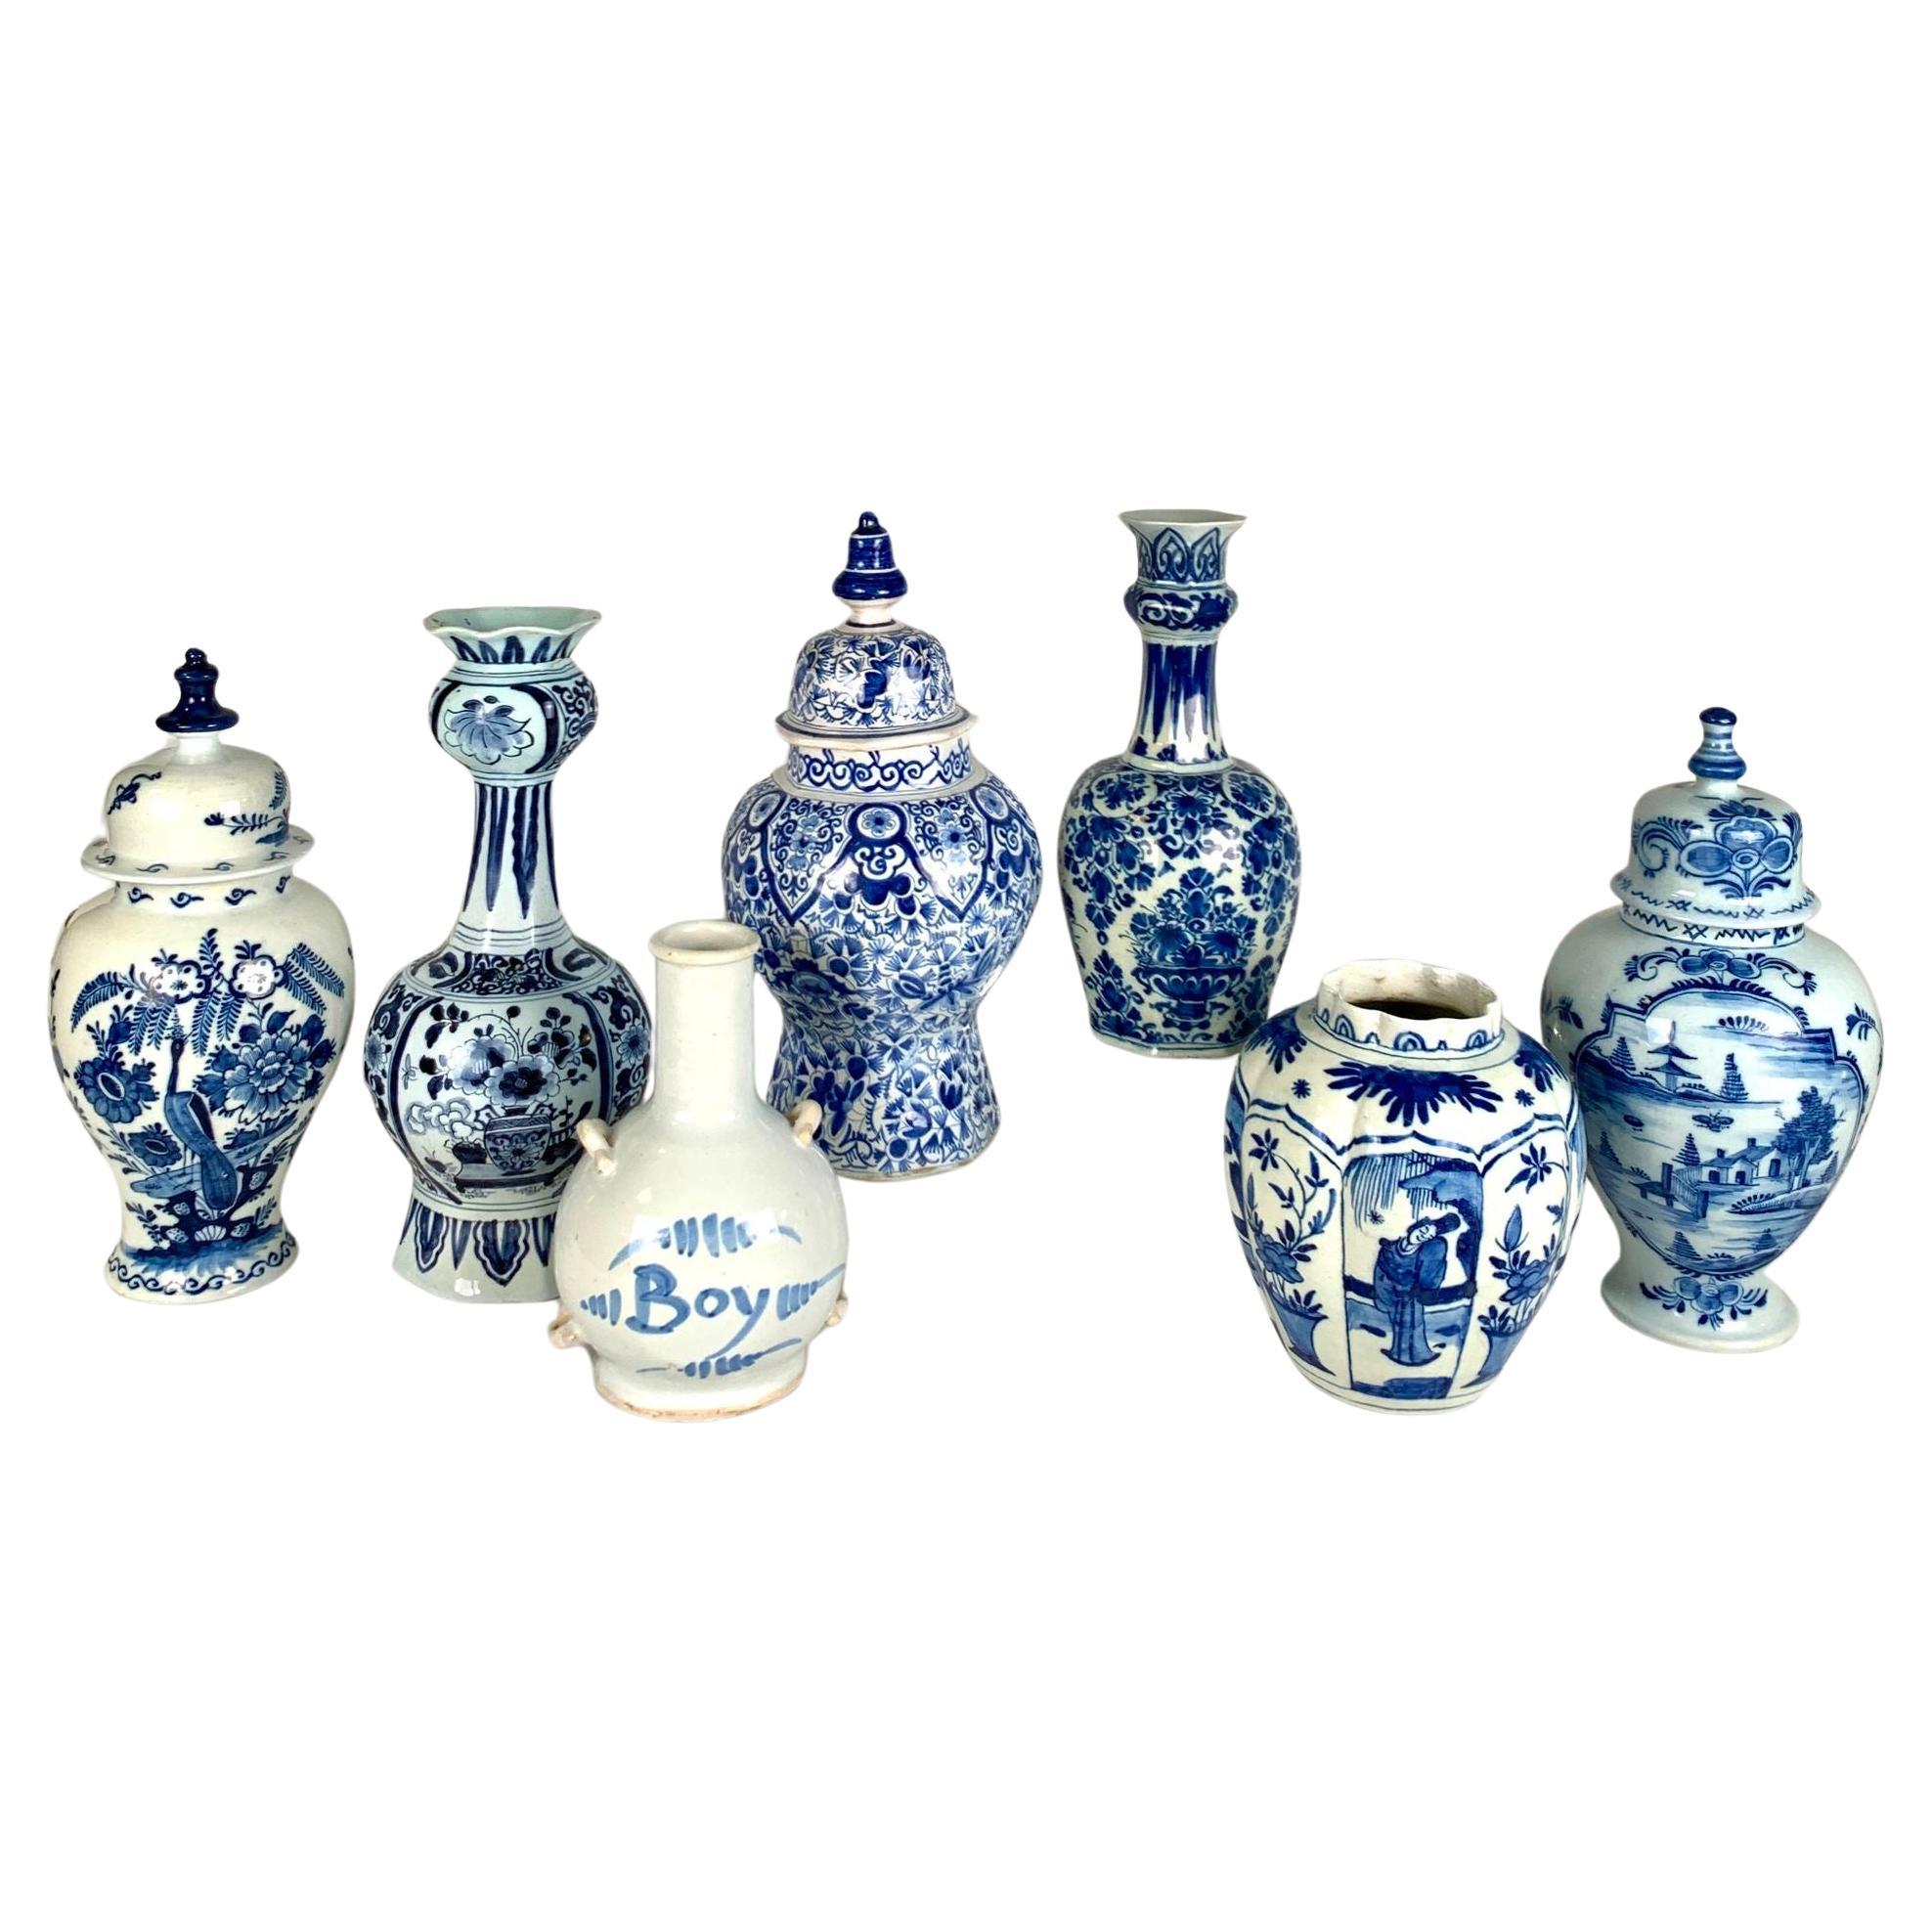  Blue and White Delft Small Vases and Jars 18th Century A Group of Seven